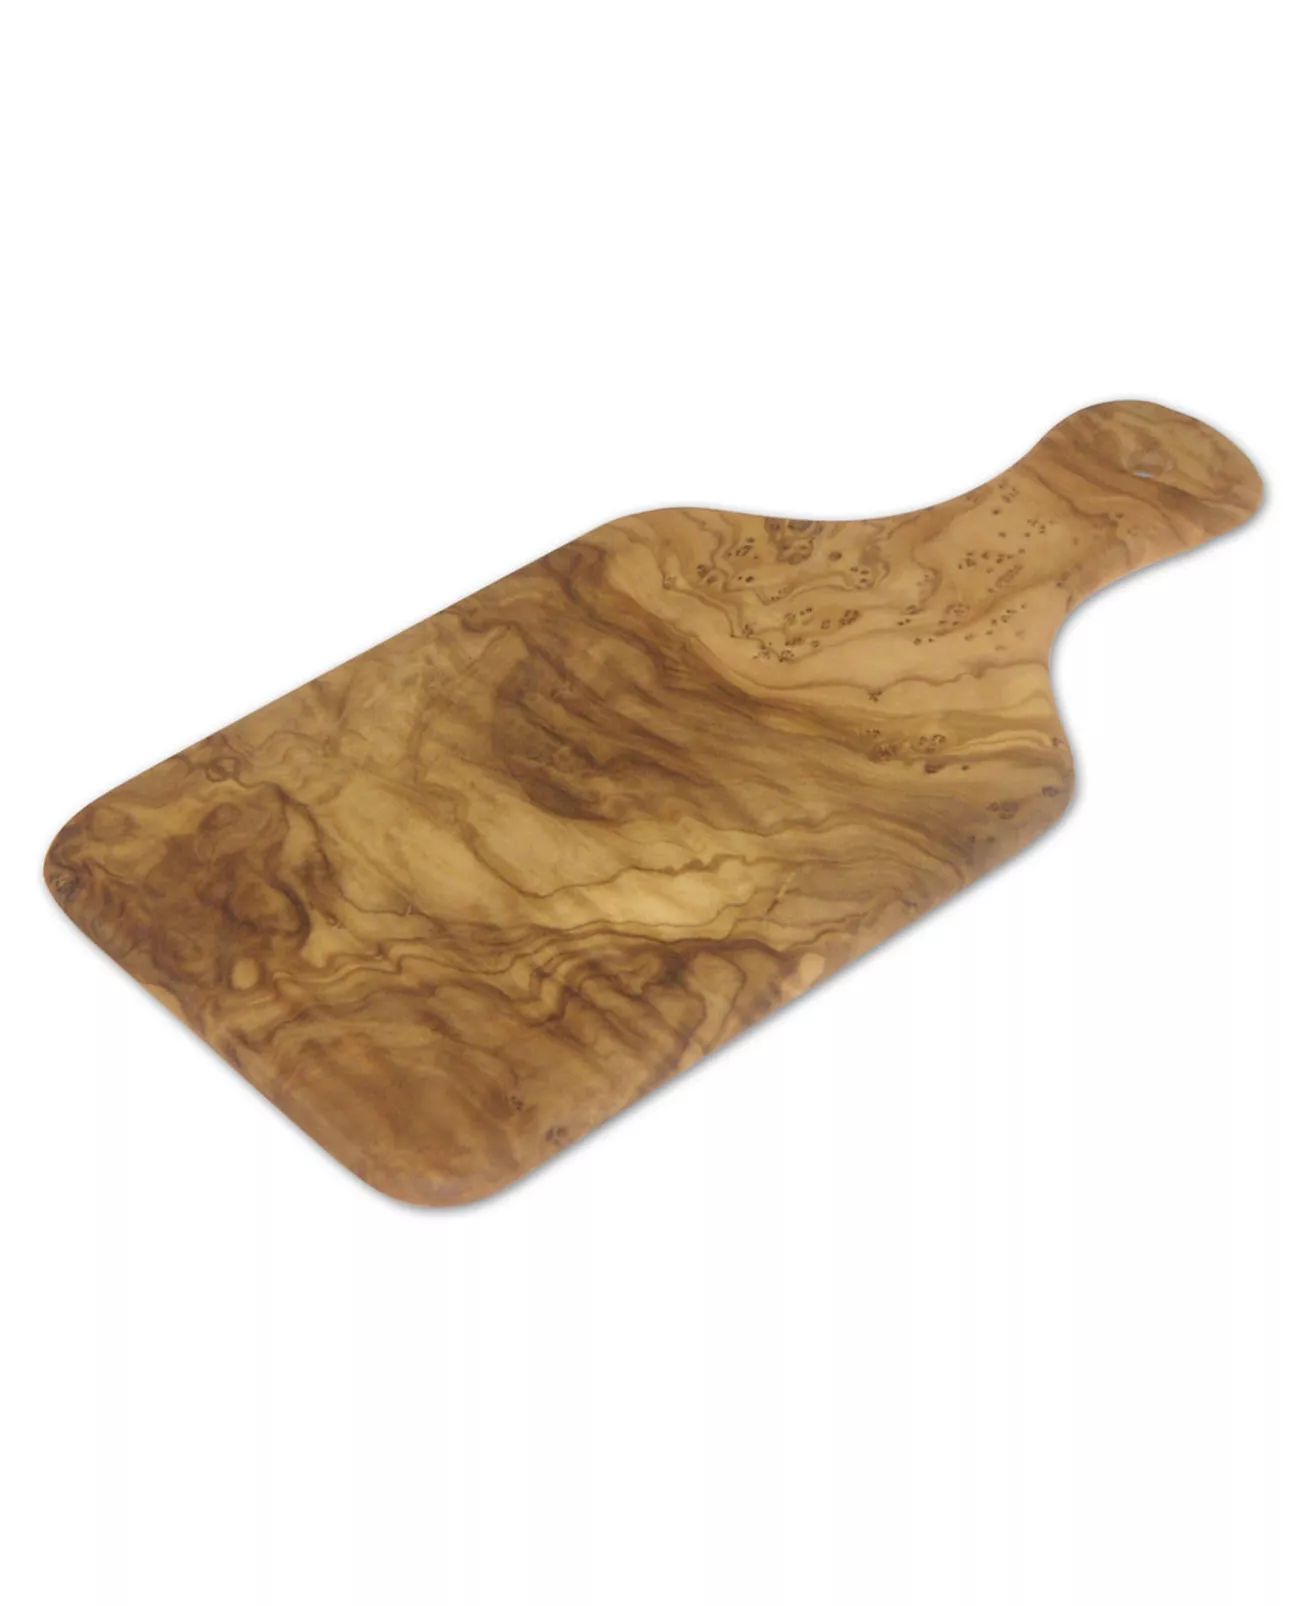 Berard Olive Wood Cutting Board with Handle | Anthropologie (US)